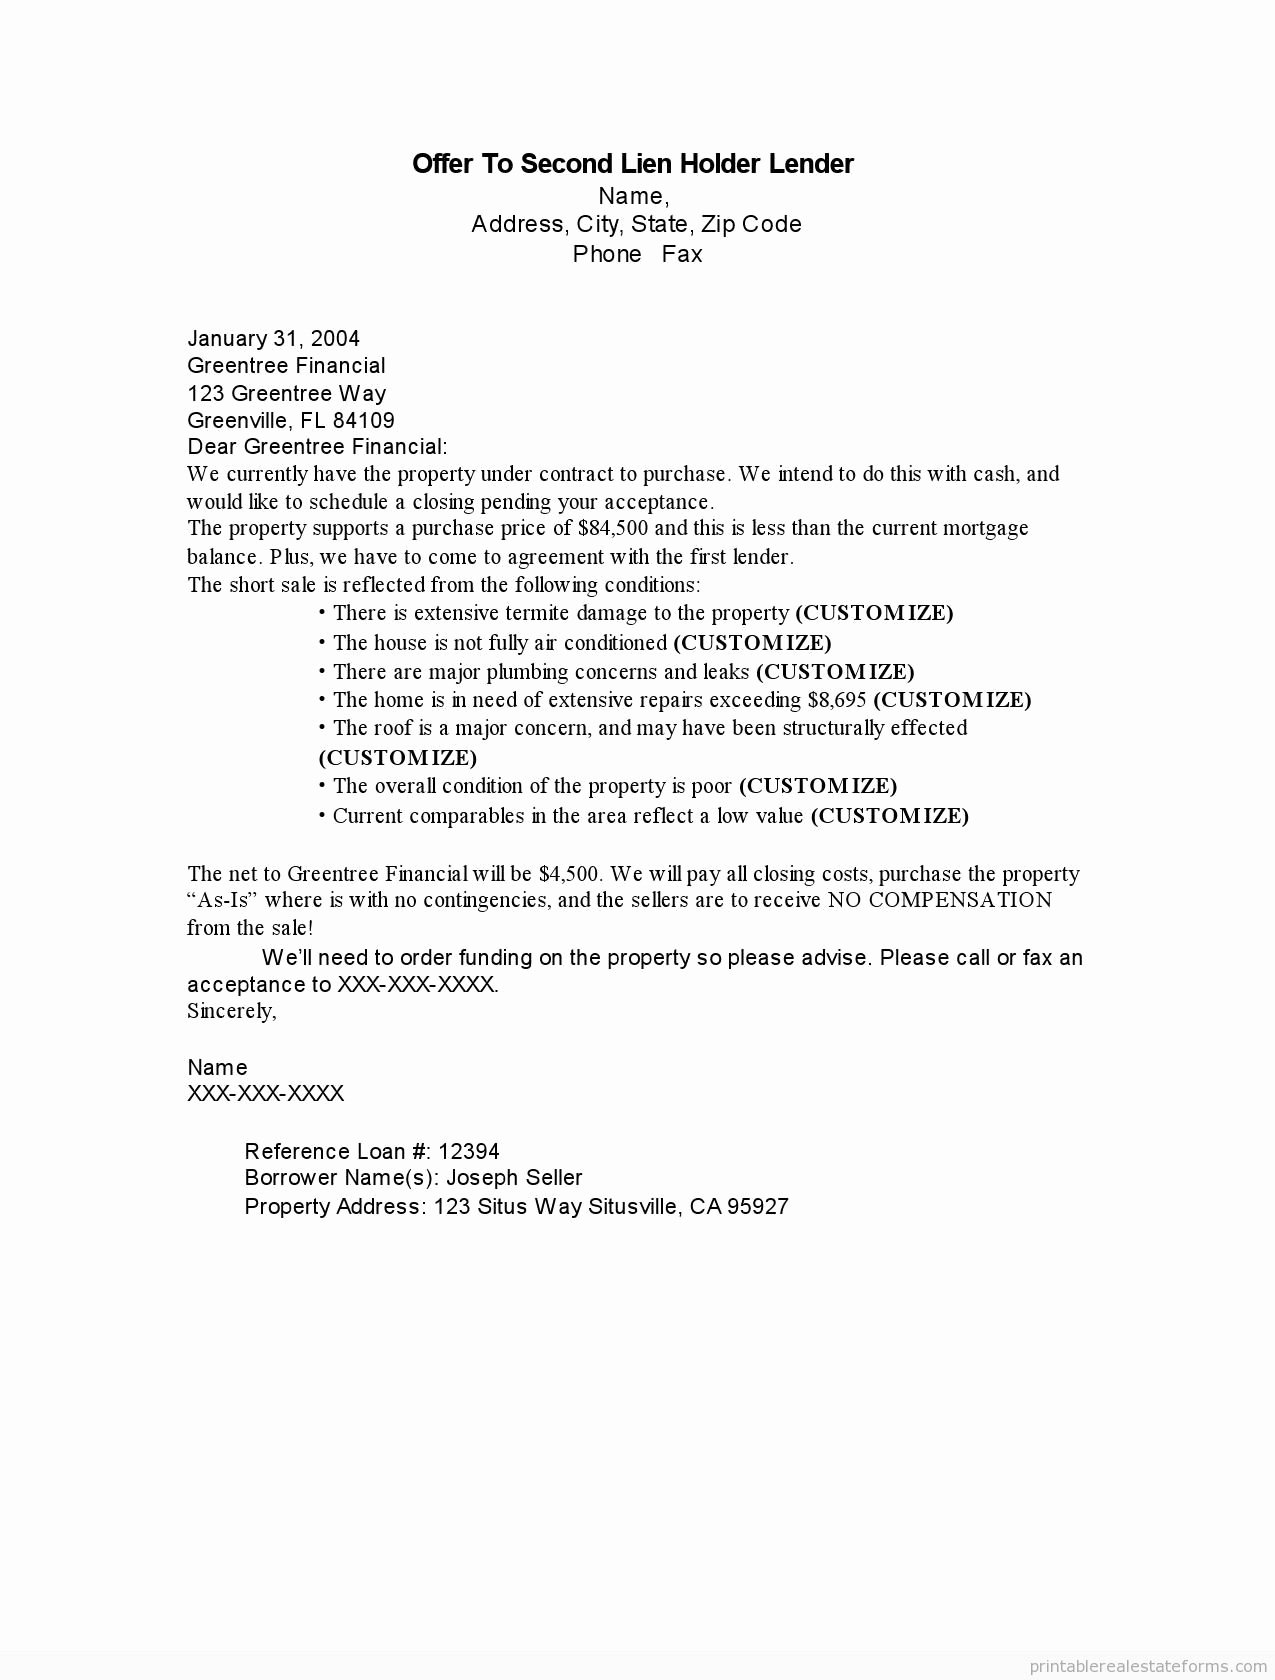 Auto Lien Release Letter Template Awesome Free Printable Fer to Second Lien Holder Lender Pdf